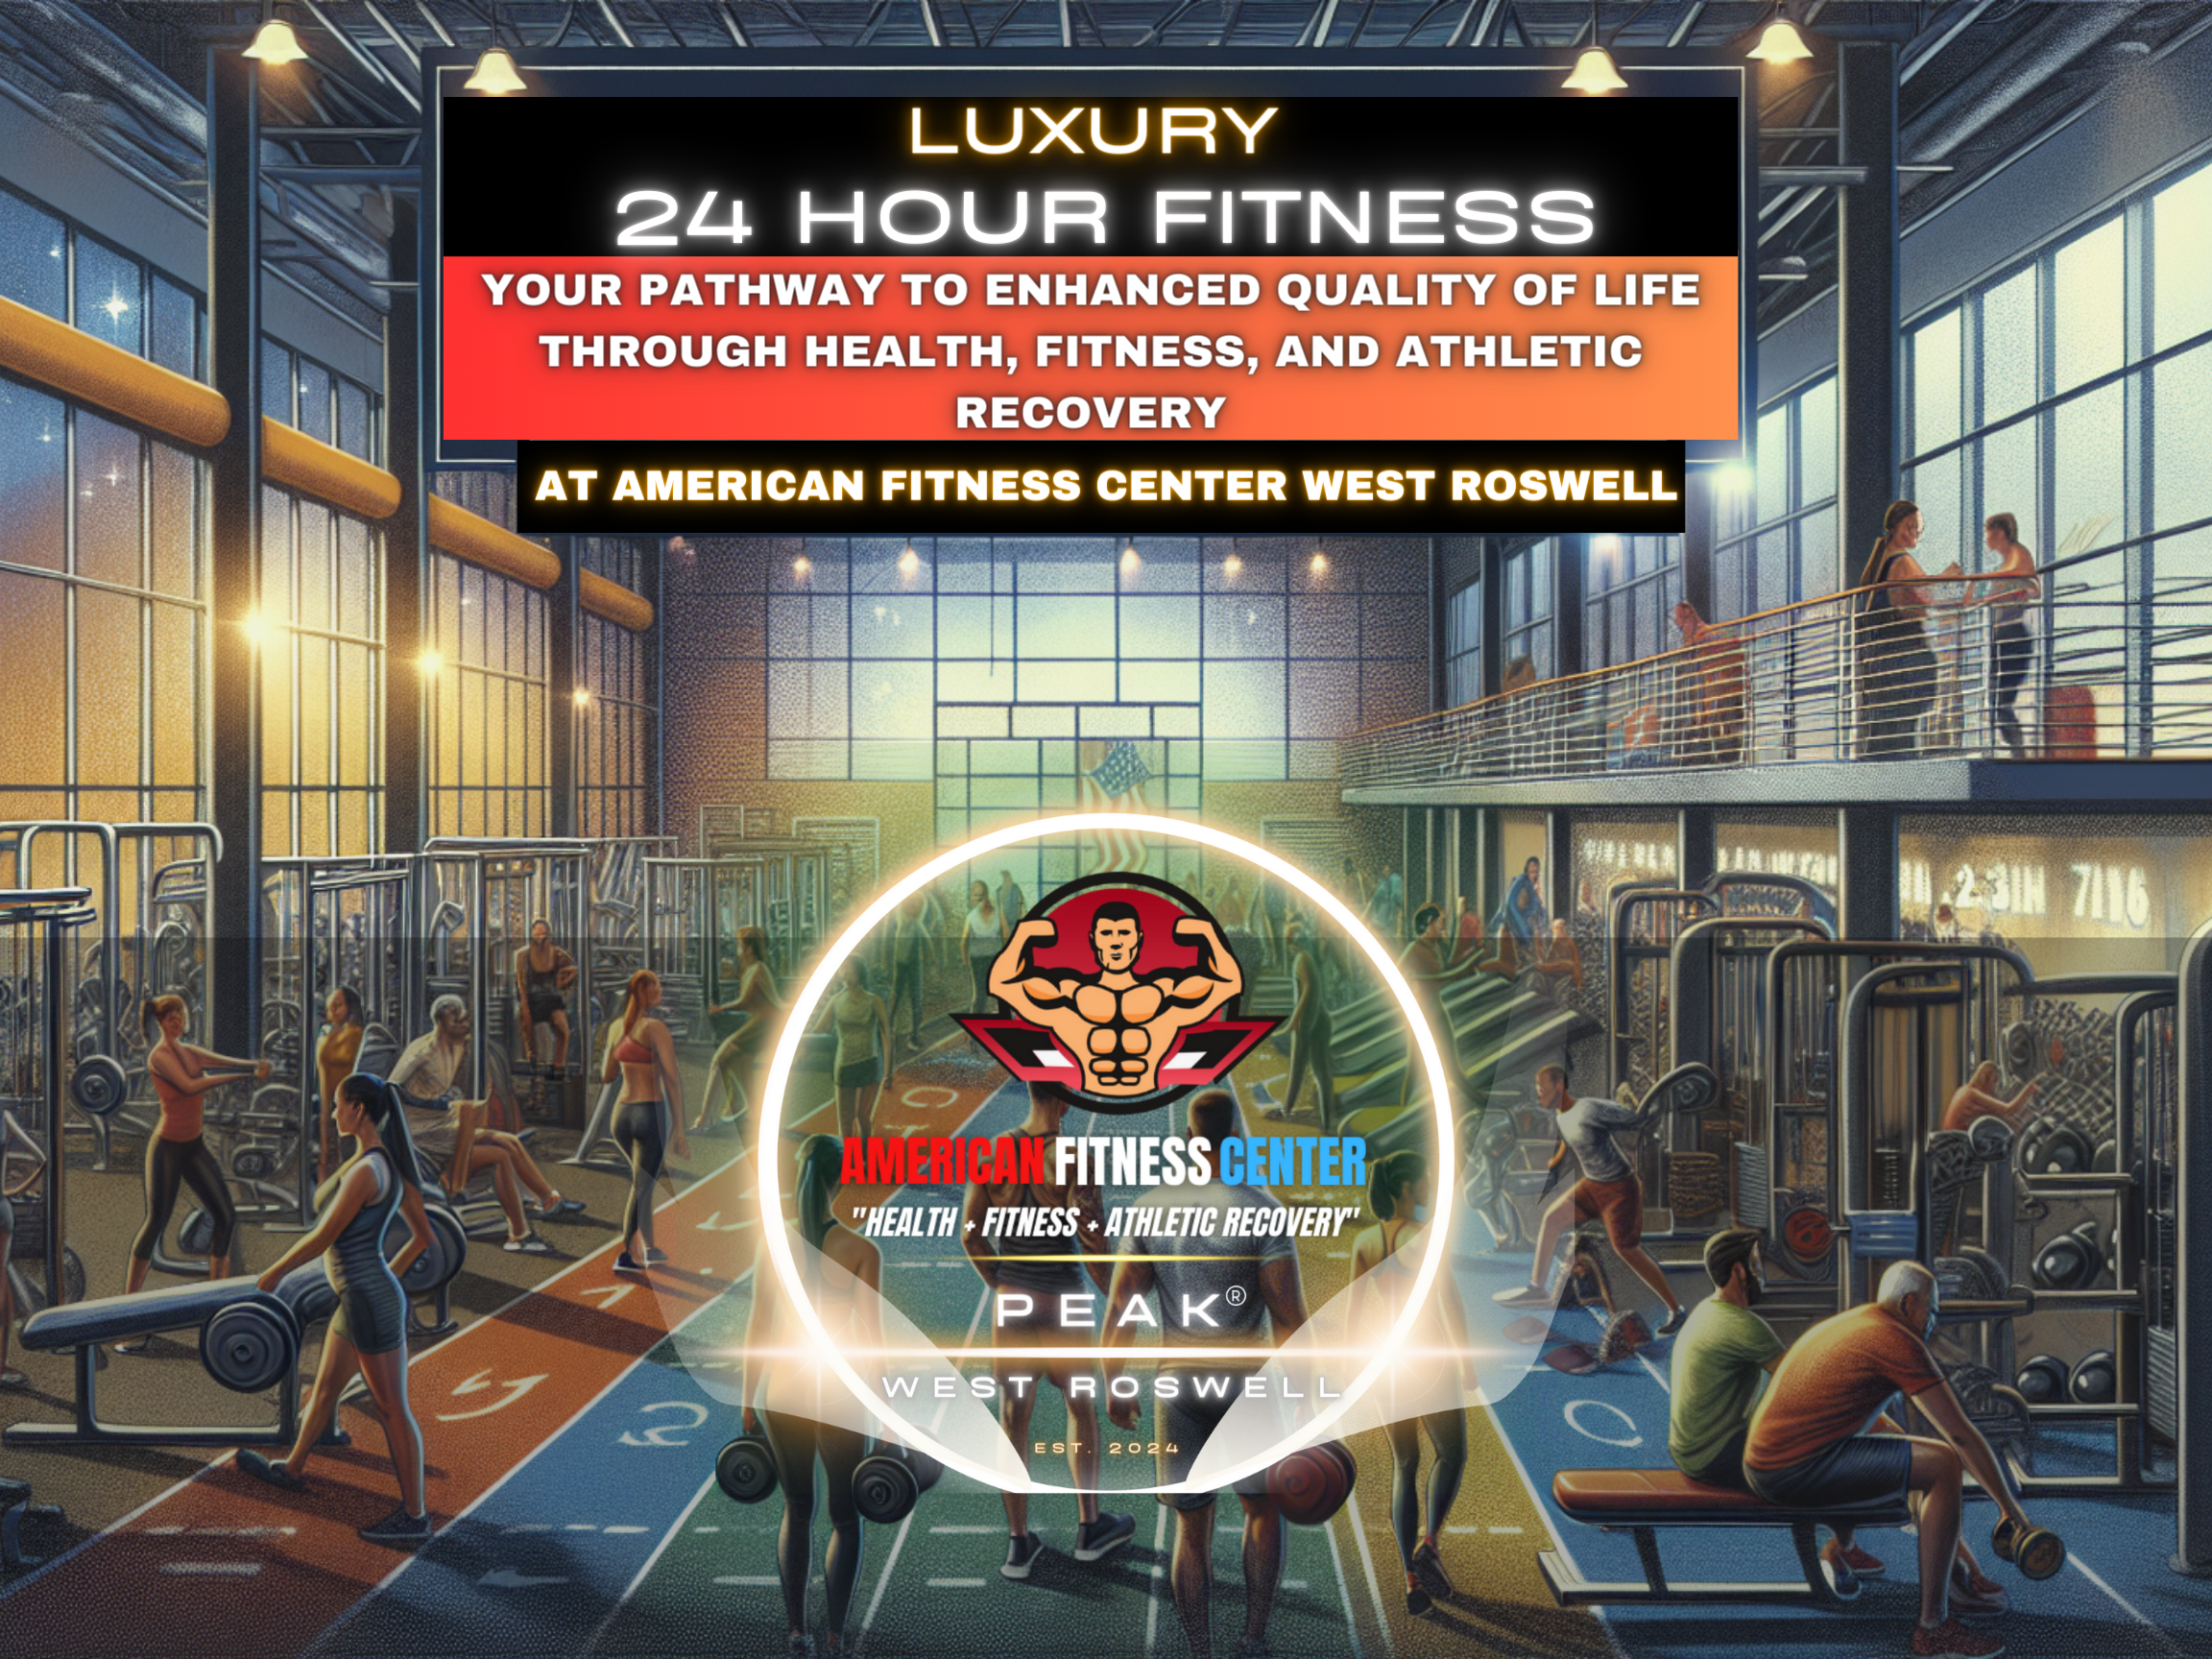 24 Hour Luxury Gym Near Me in Roswell, GA - American Fitness Center West Roswell, GA